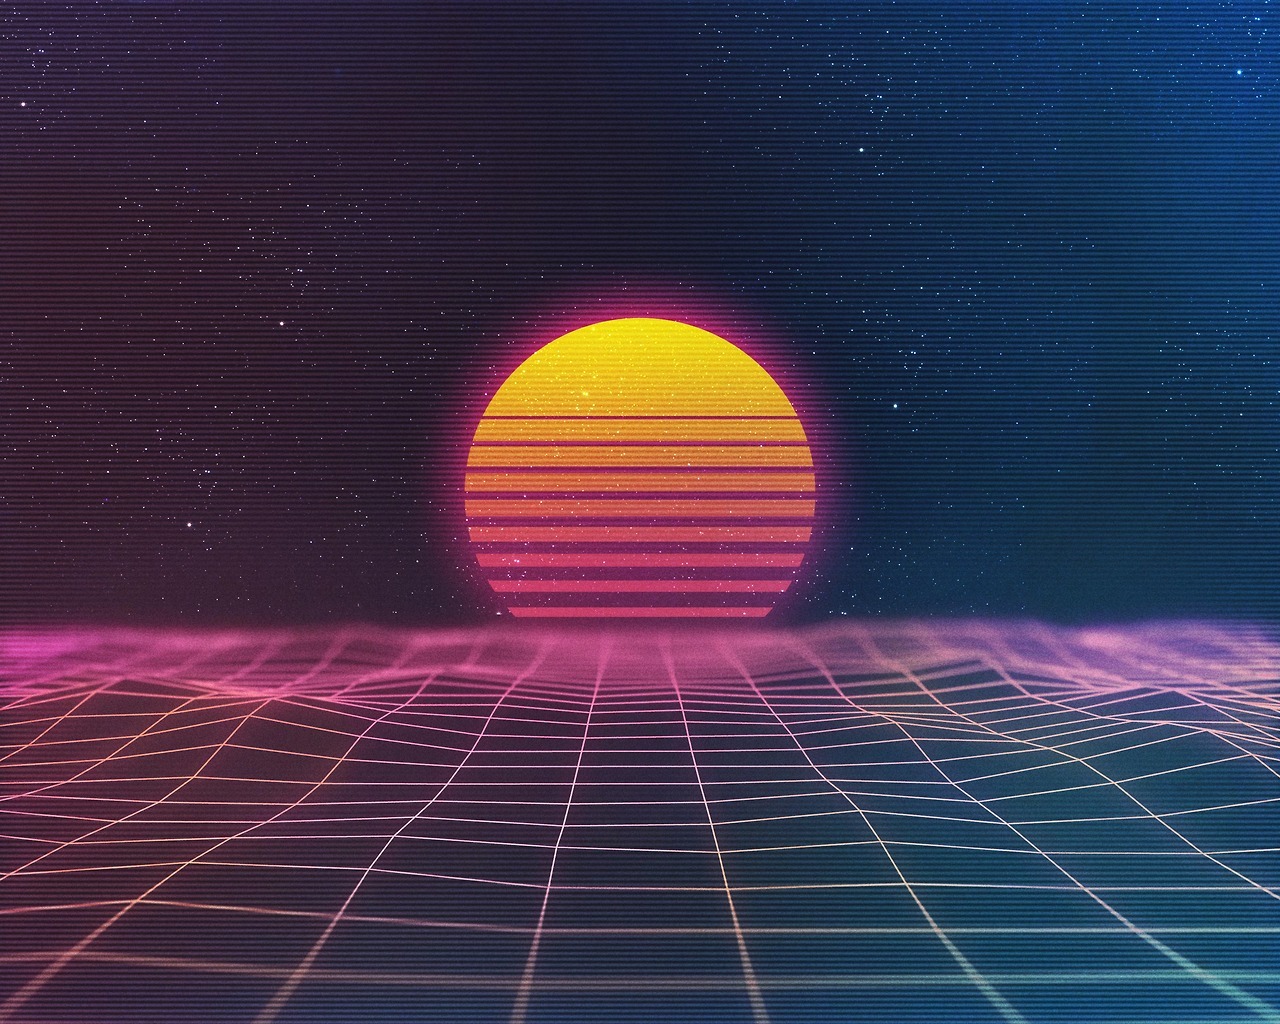 Tequila Sunriseget The Radpack, A Set Of Free Hd Wallpapers - Retro Wave - HD Wallpaper 